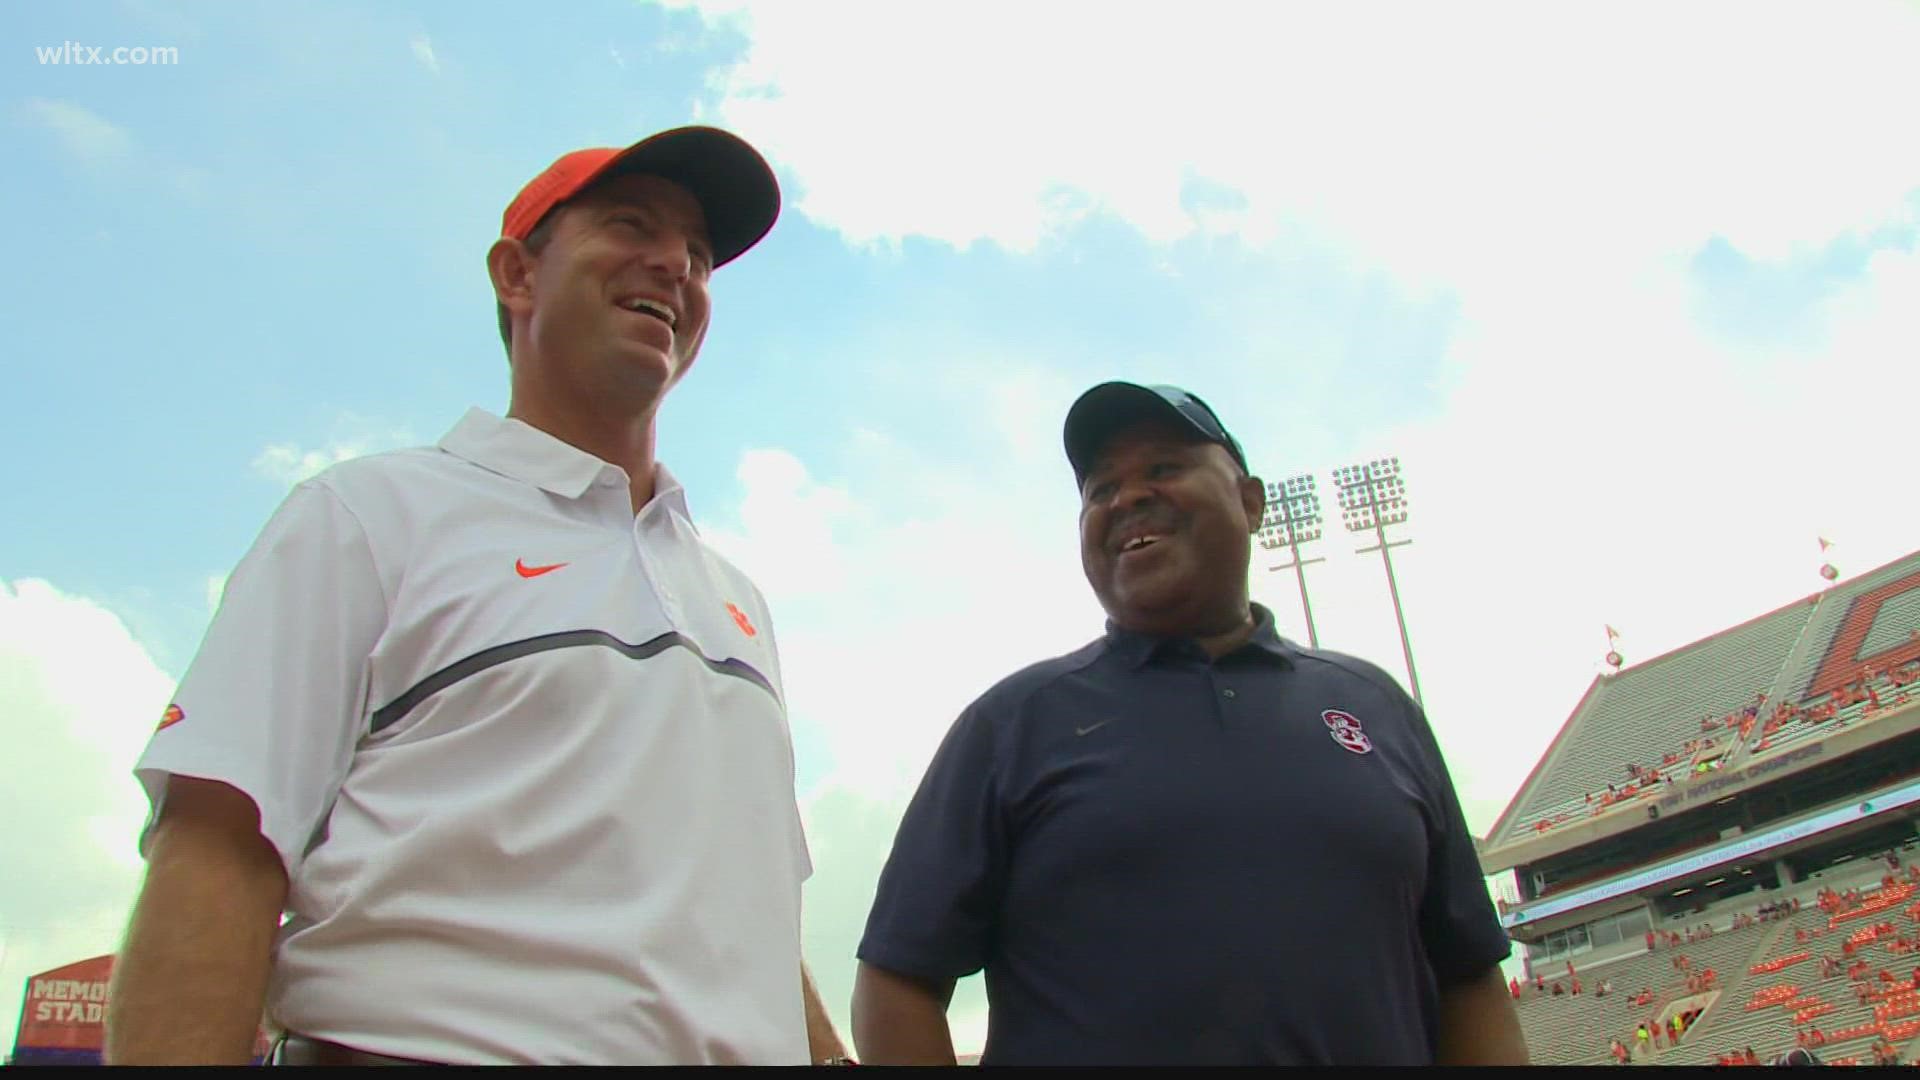 Clemson head coach Dabo Swinney and S.C. State's Buddy Pough will meet again this Saturday in Death Valley.